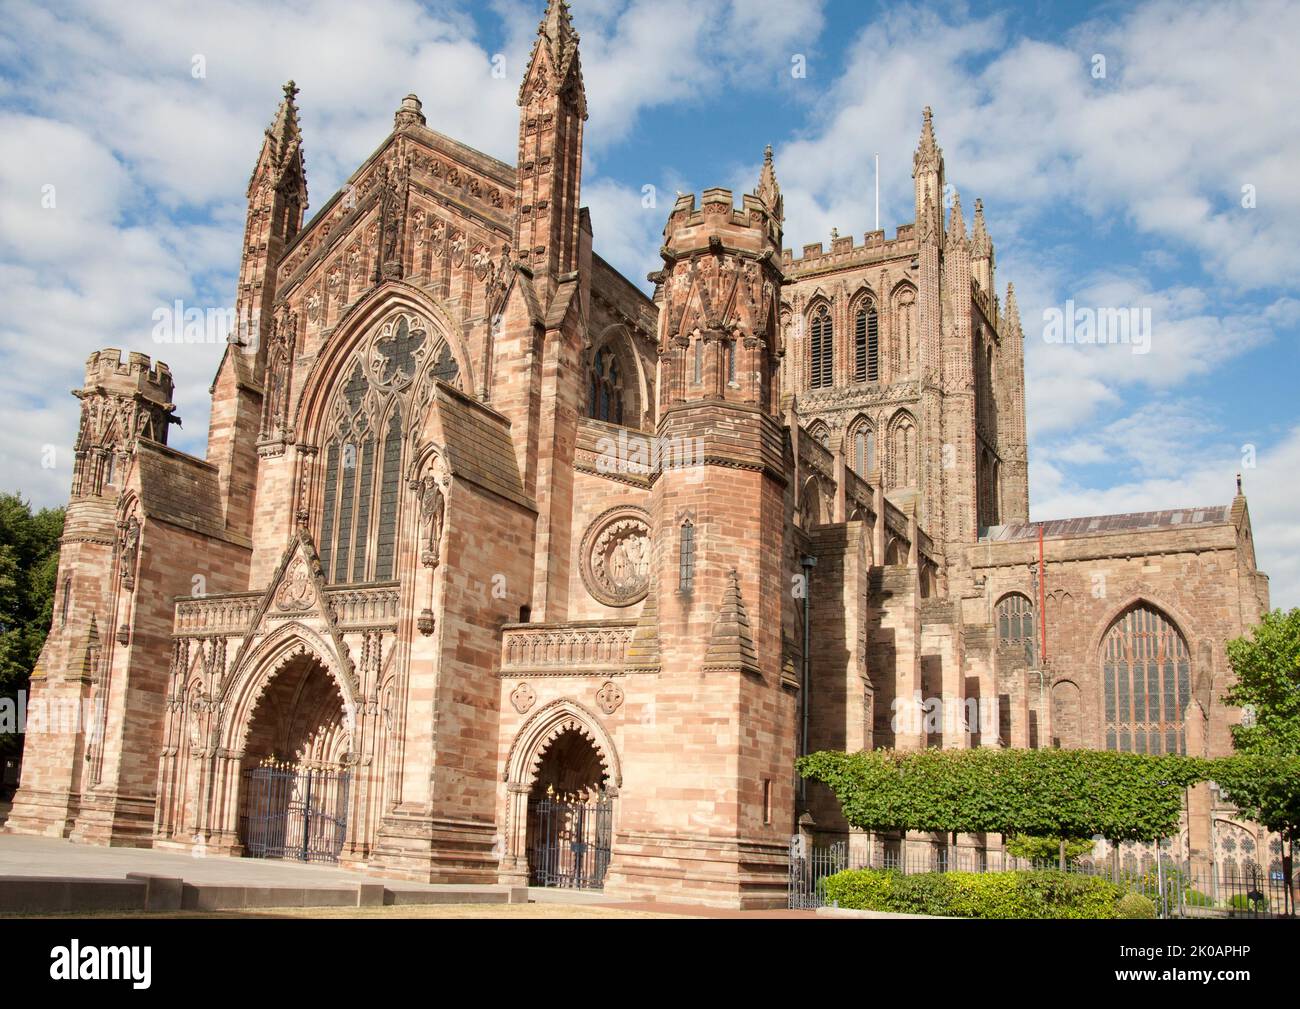 Hereford cathedral, St Mary the Virgin & St Ethelbert the King, Herefordshire, England Stock Photo